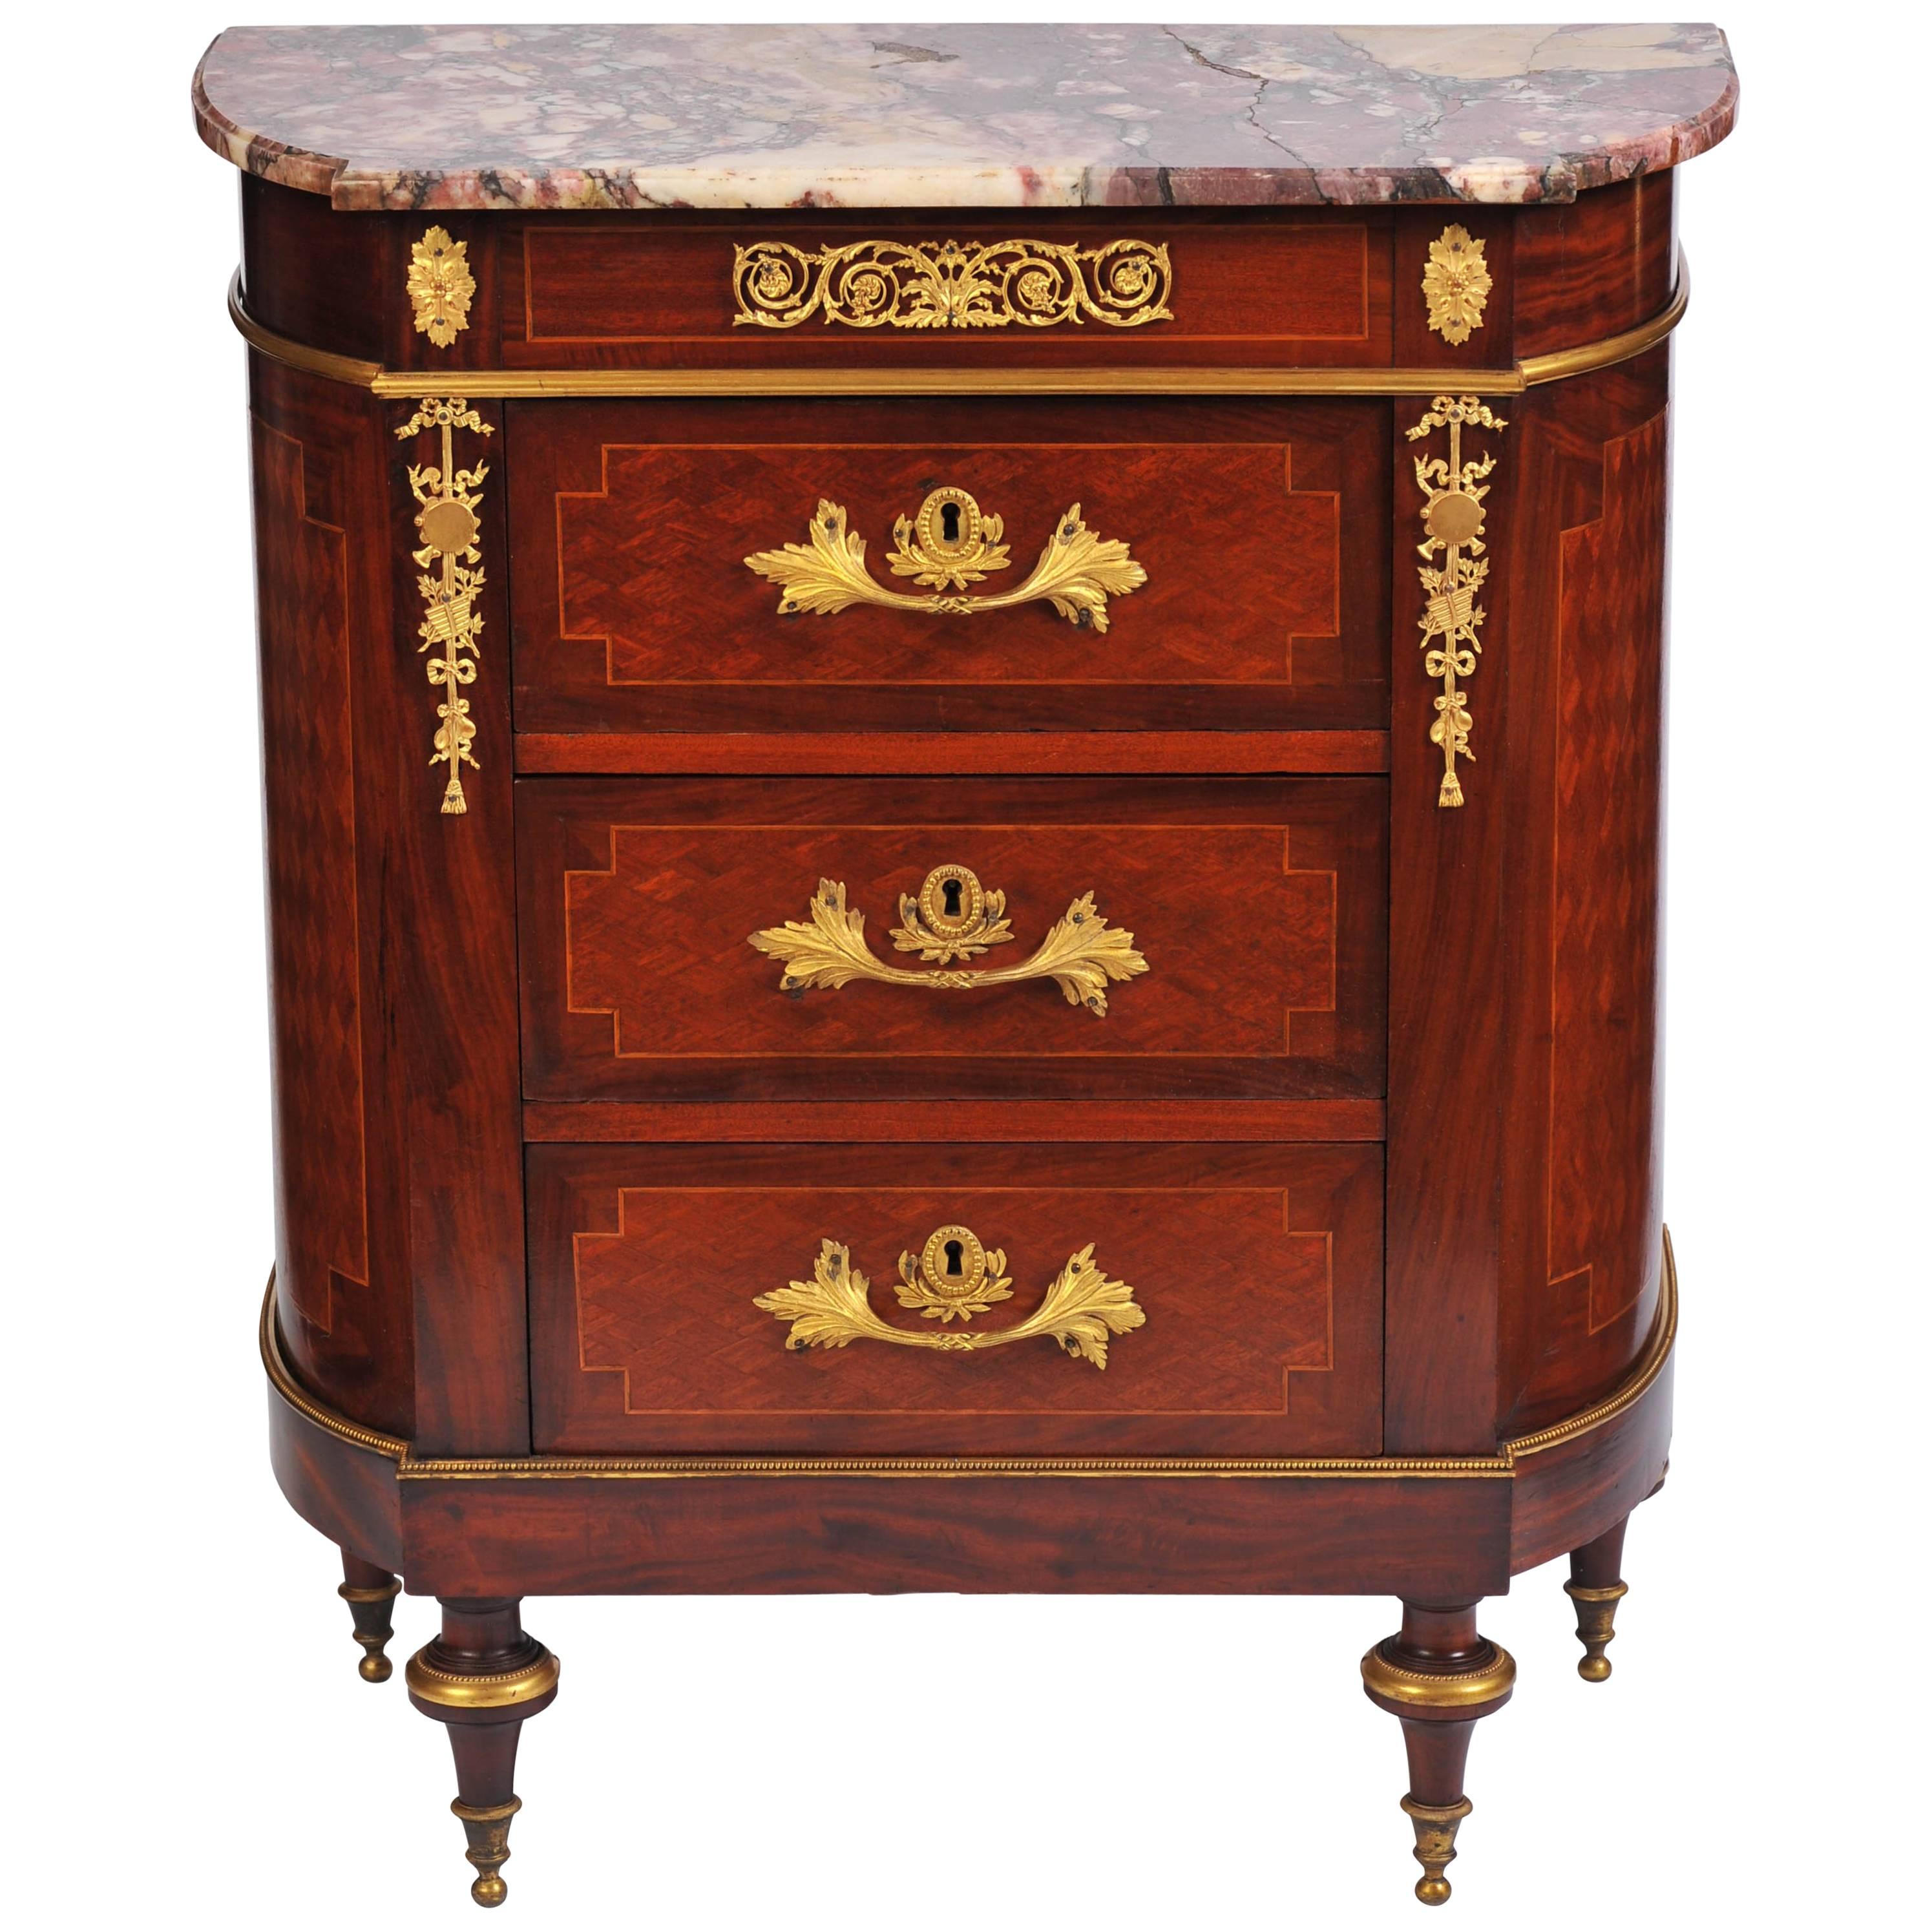 Late 19th Century Small Mahogany and Kingwood Commode in the Louis XVI Style